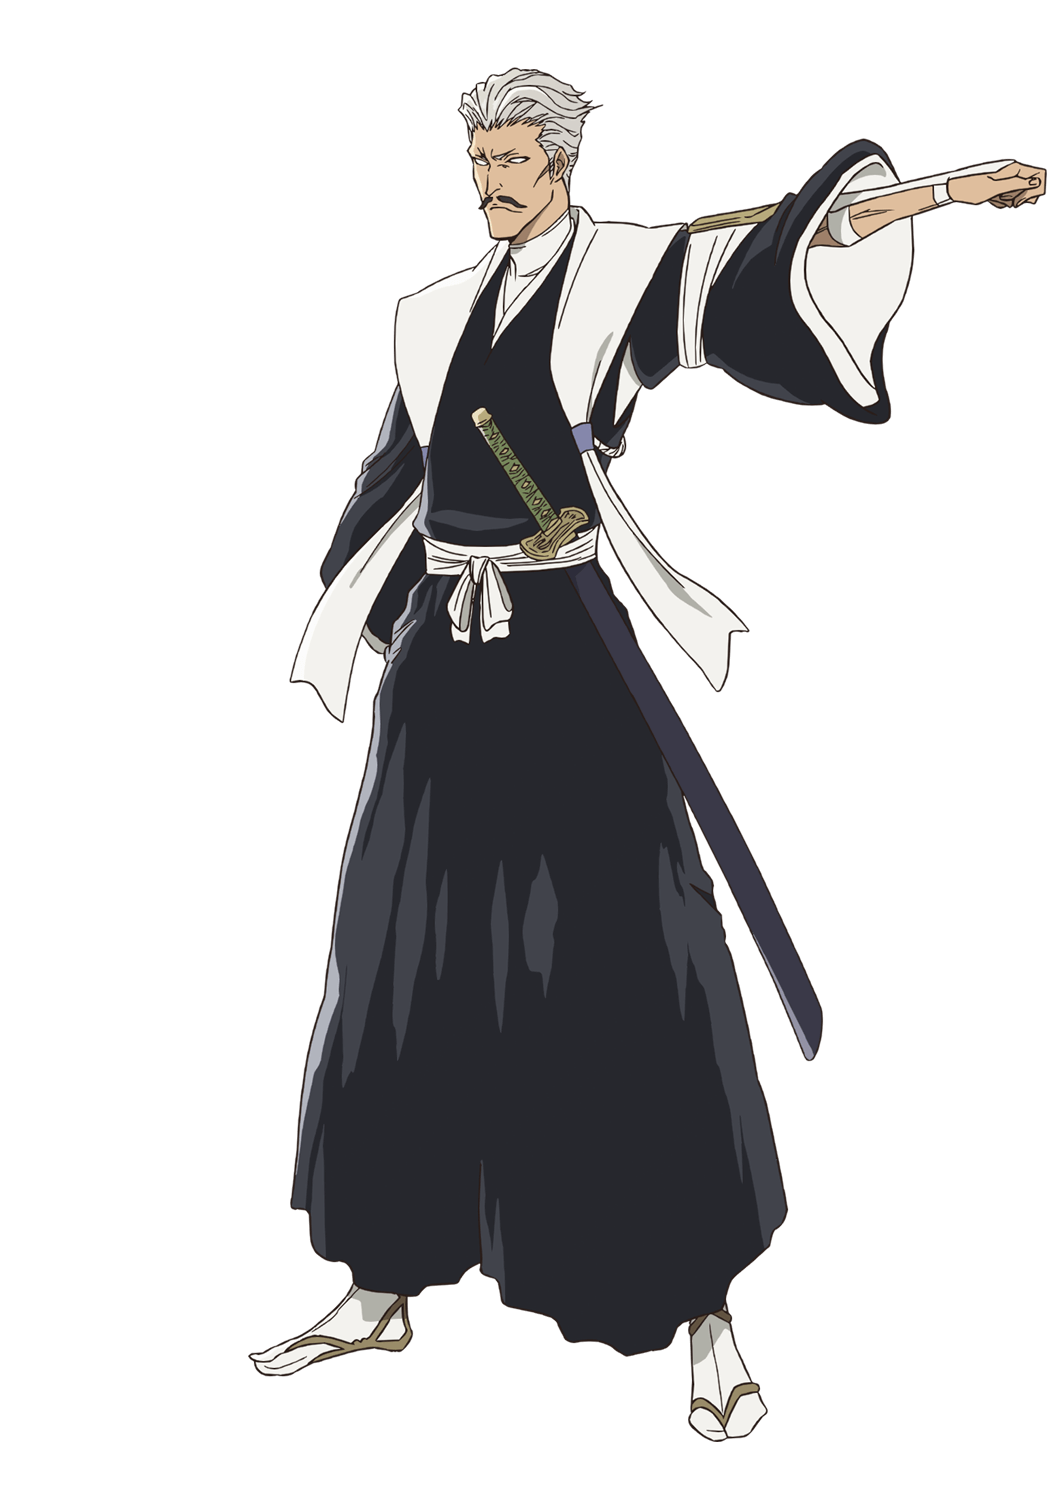 Category:Characters, Bleach Wiki